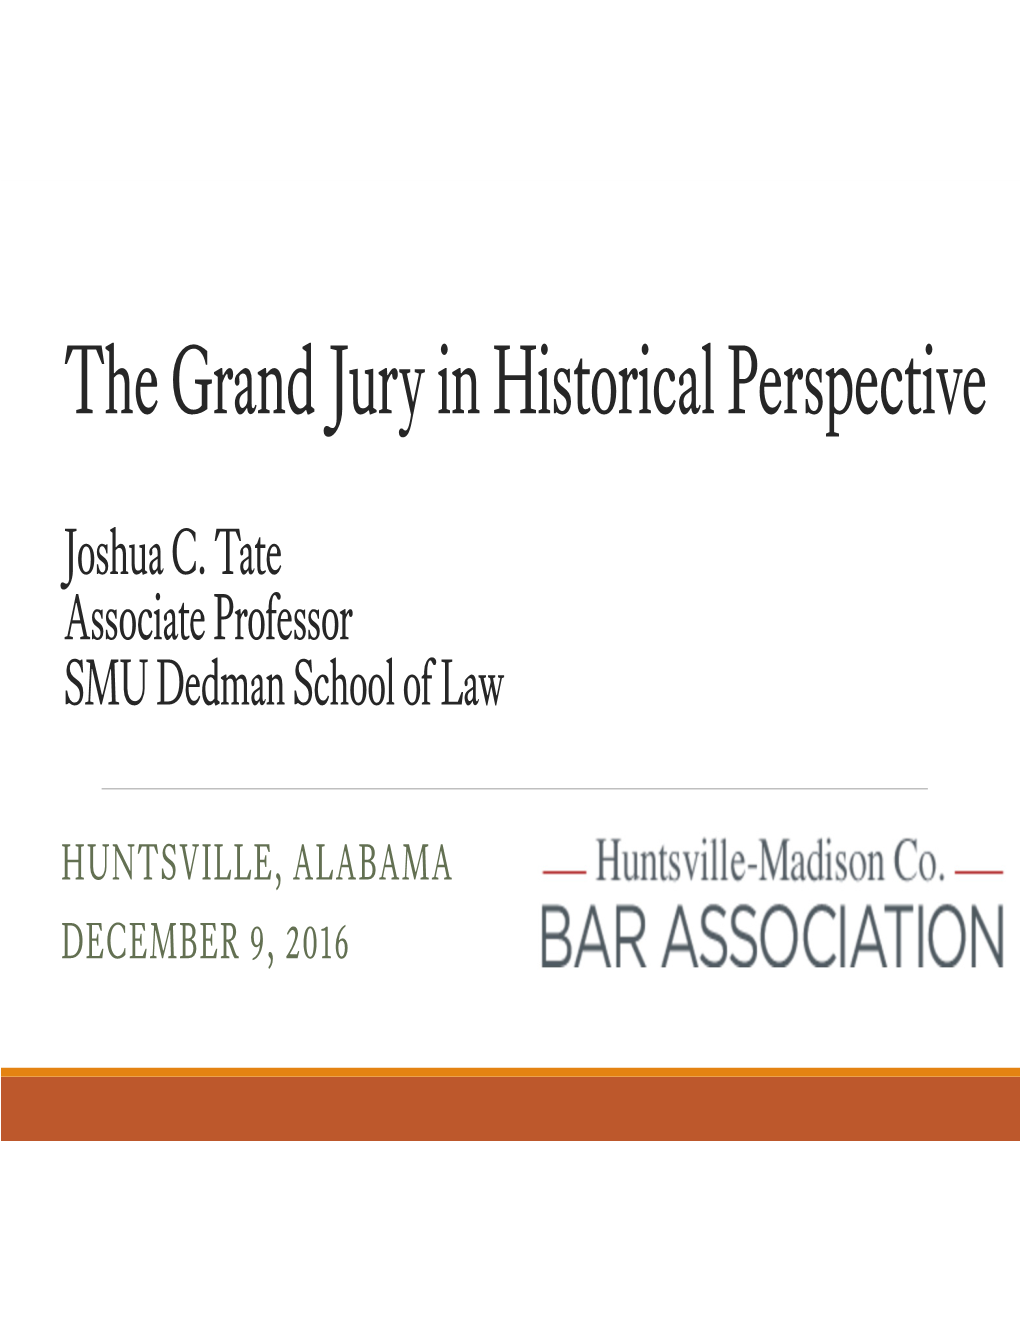 The Grand Jury in Historical Perspective